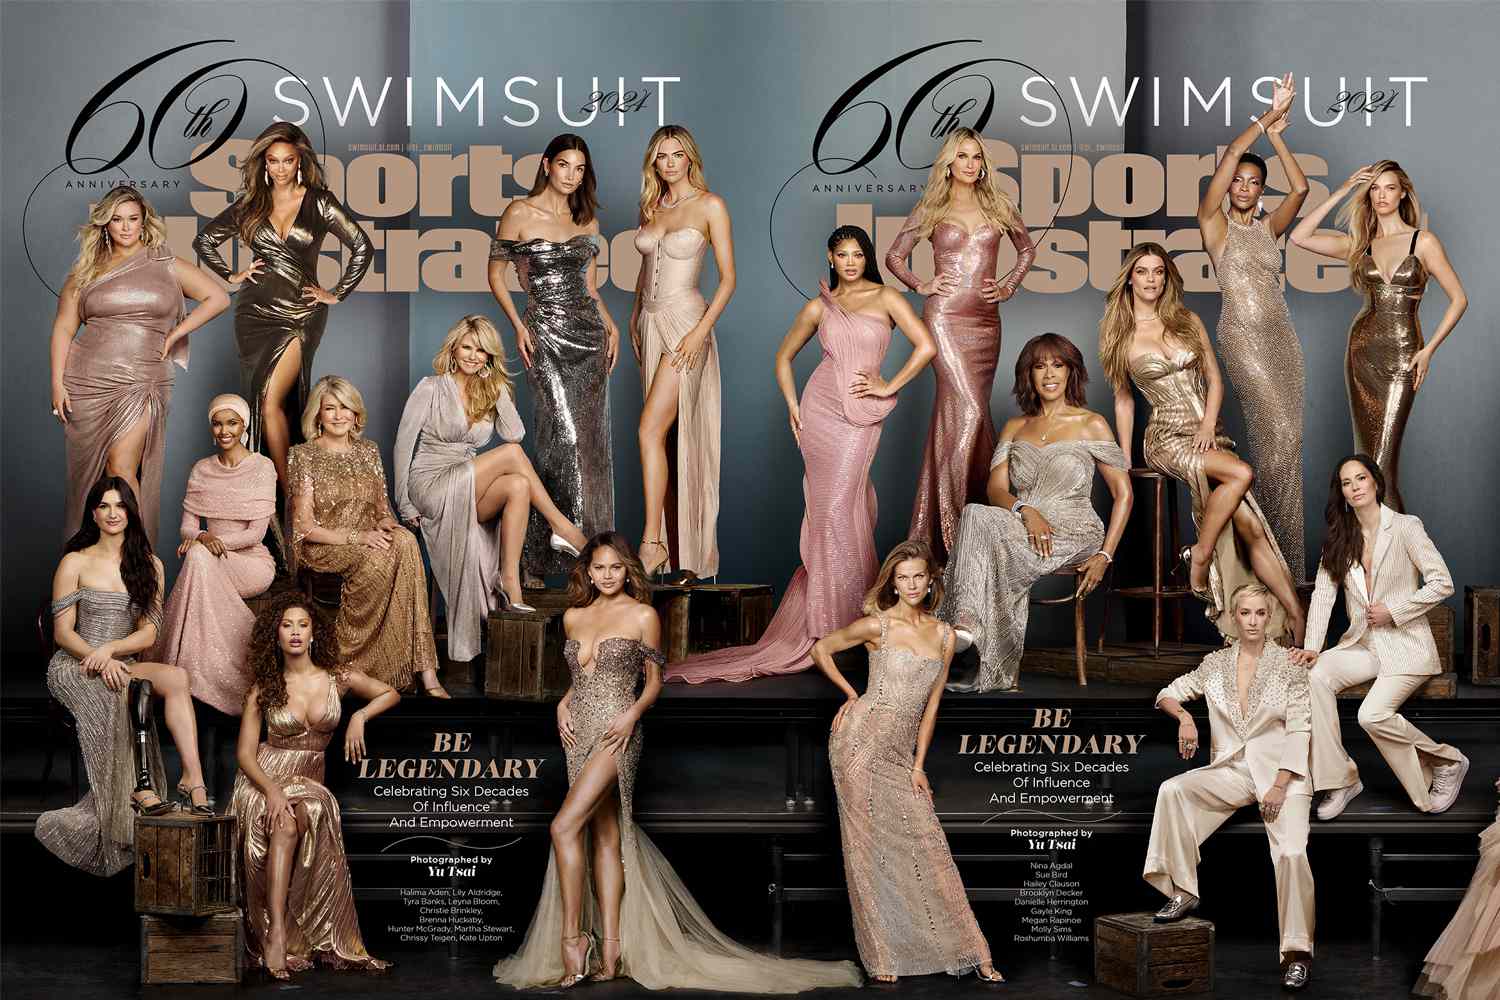 'SI Swimsuit' Celebrates 60th Anniversary with Iconic Legends Covers Starring Martha Stewart, Tyra Banks and More